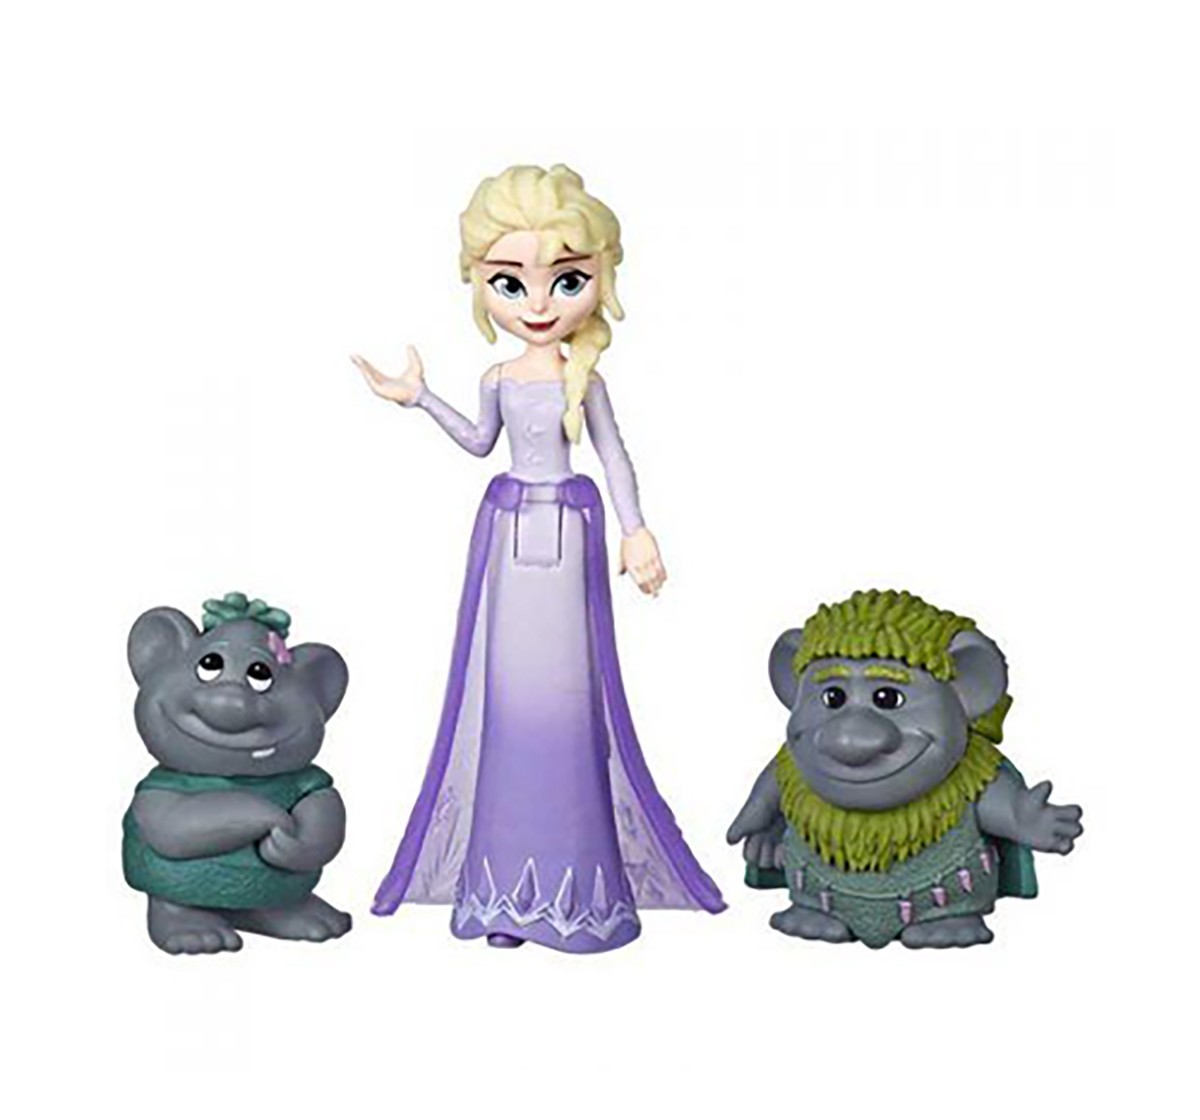 Disney Frozen 2 Elsa Small Doll And Friends Assorted Dolls & Accessories for age 3Y+ 